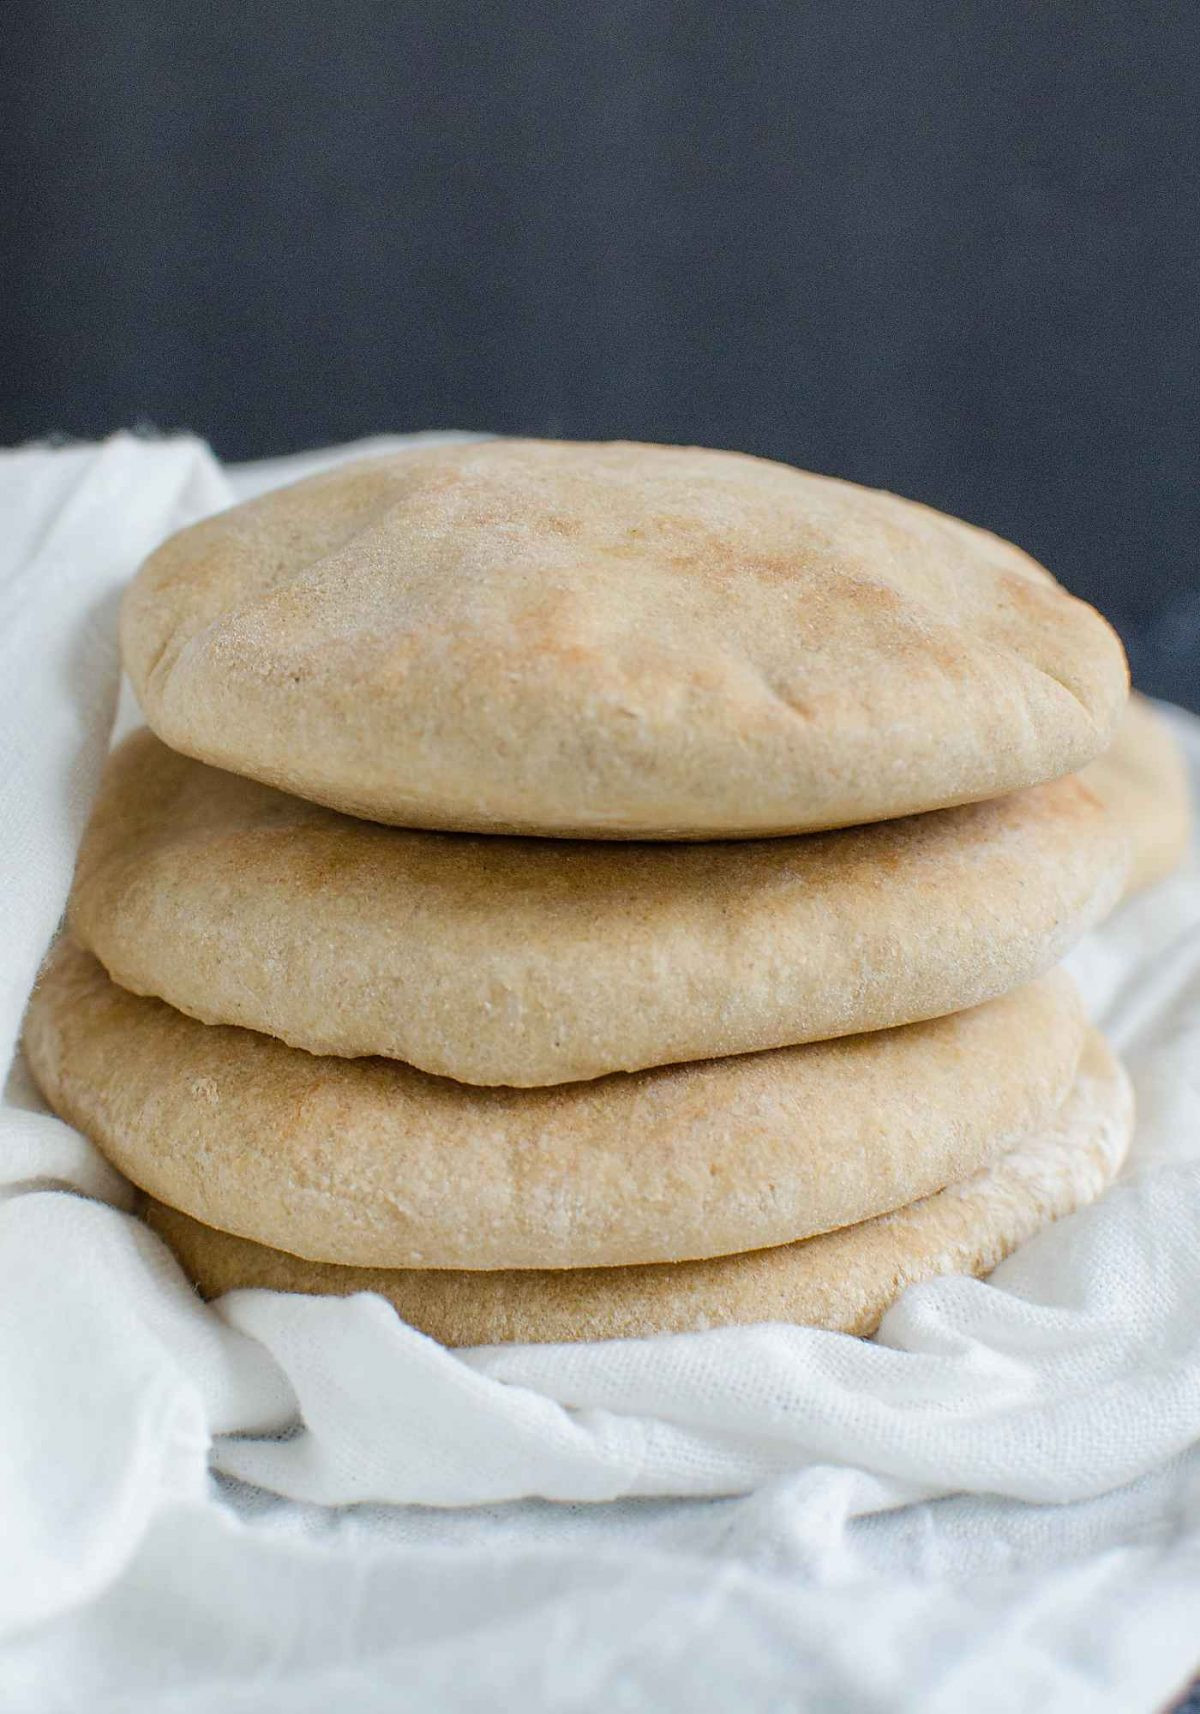 Whole Wheat Pita Bread Healthy
 Soft Fluffy and Healthy Homemade Whole Wheat Pita Bread